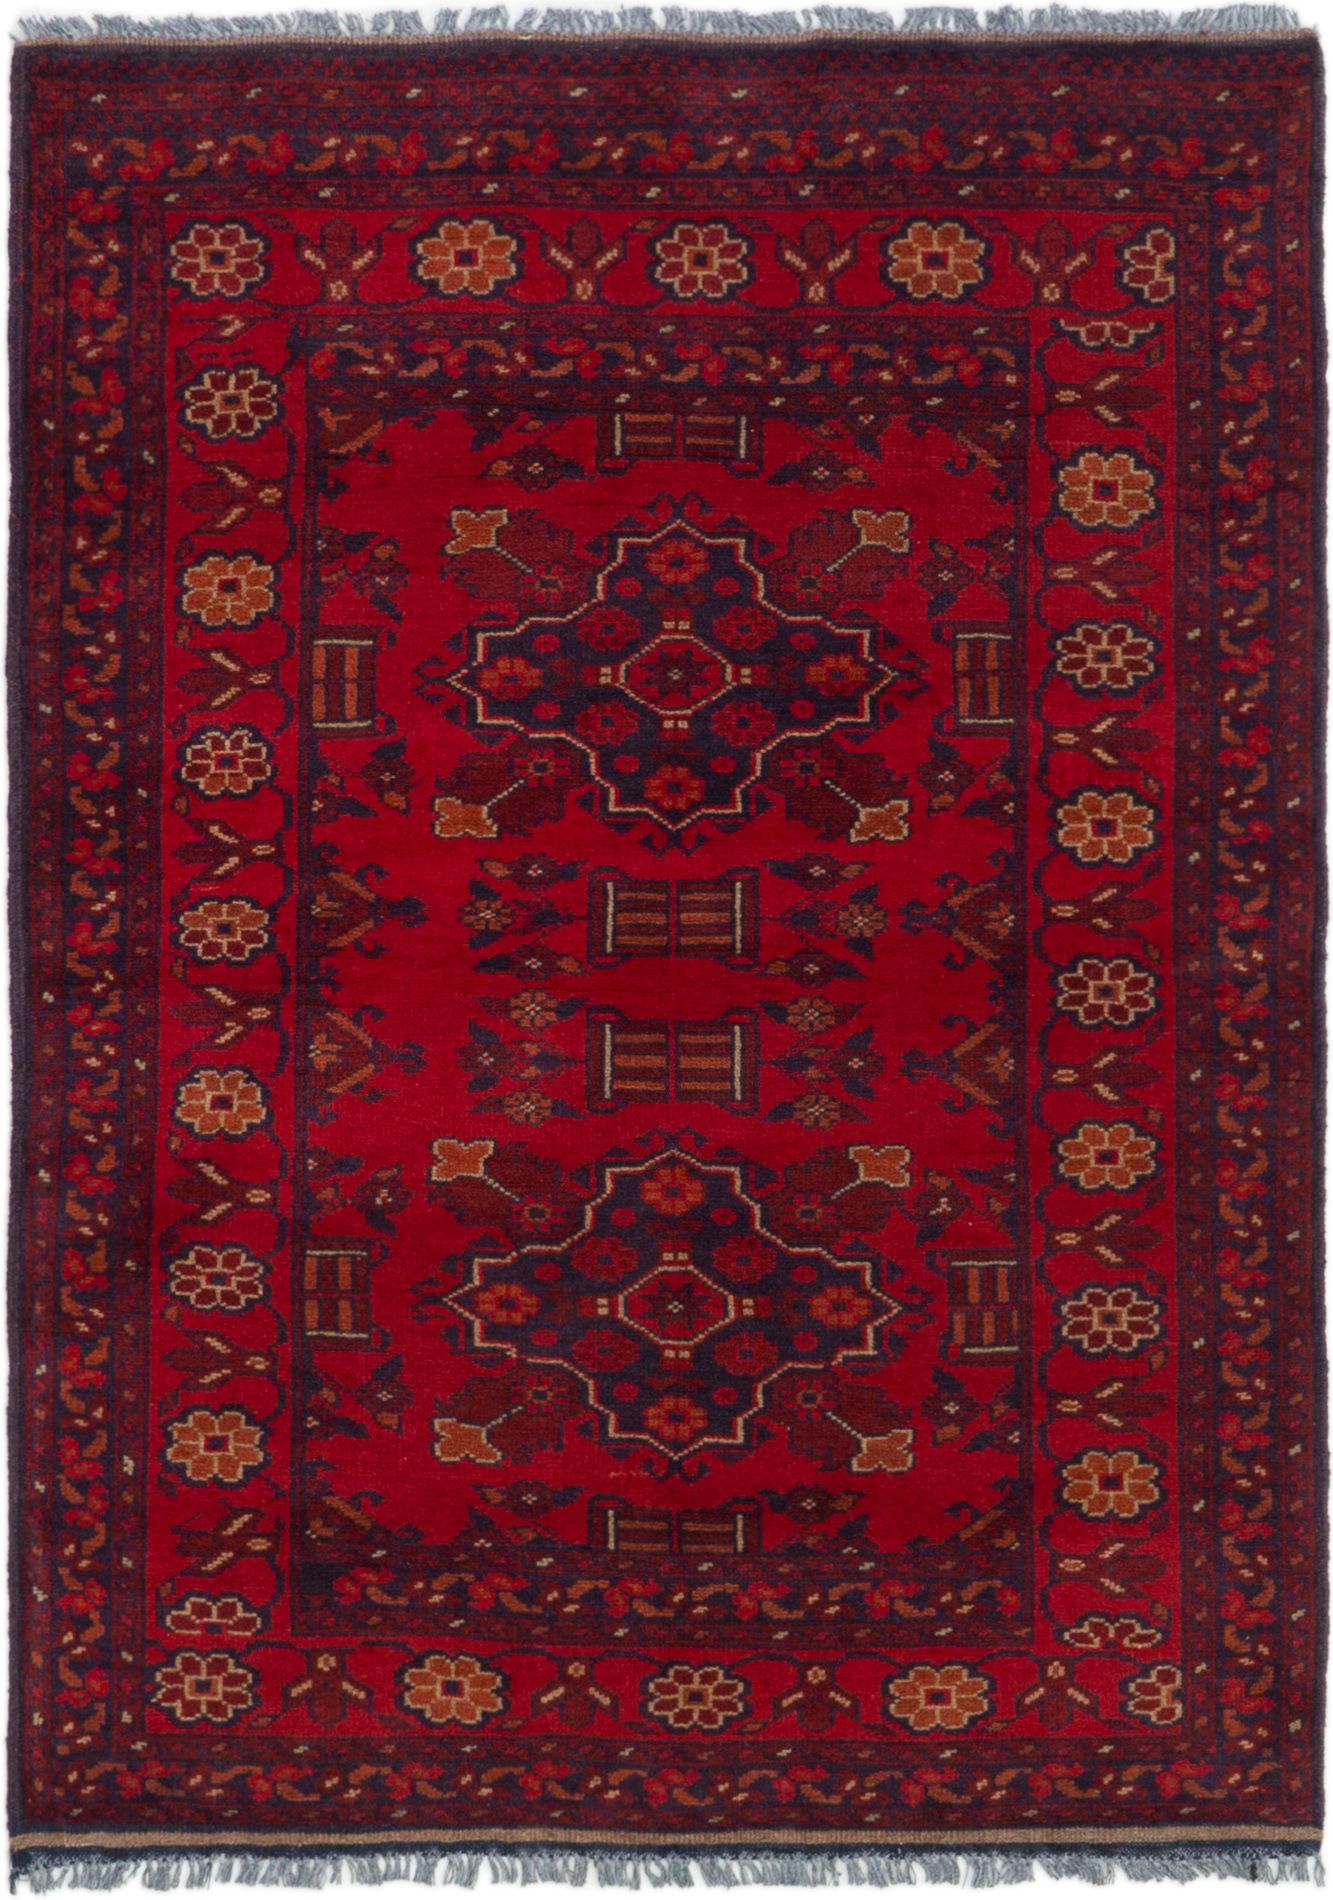 Hand-knotted Finest Khal Mohammadi Red Wool Rug 3'5" x 4'11" (17) Size: 3'5" x 4'11"  